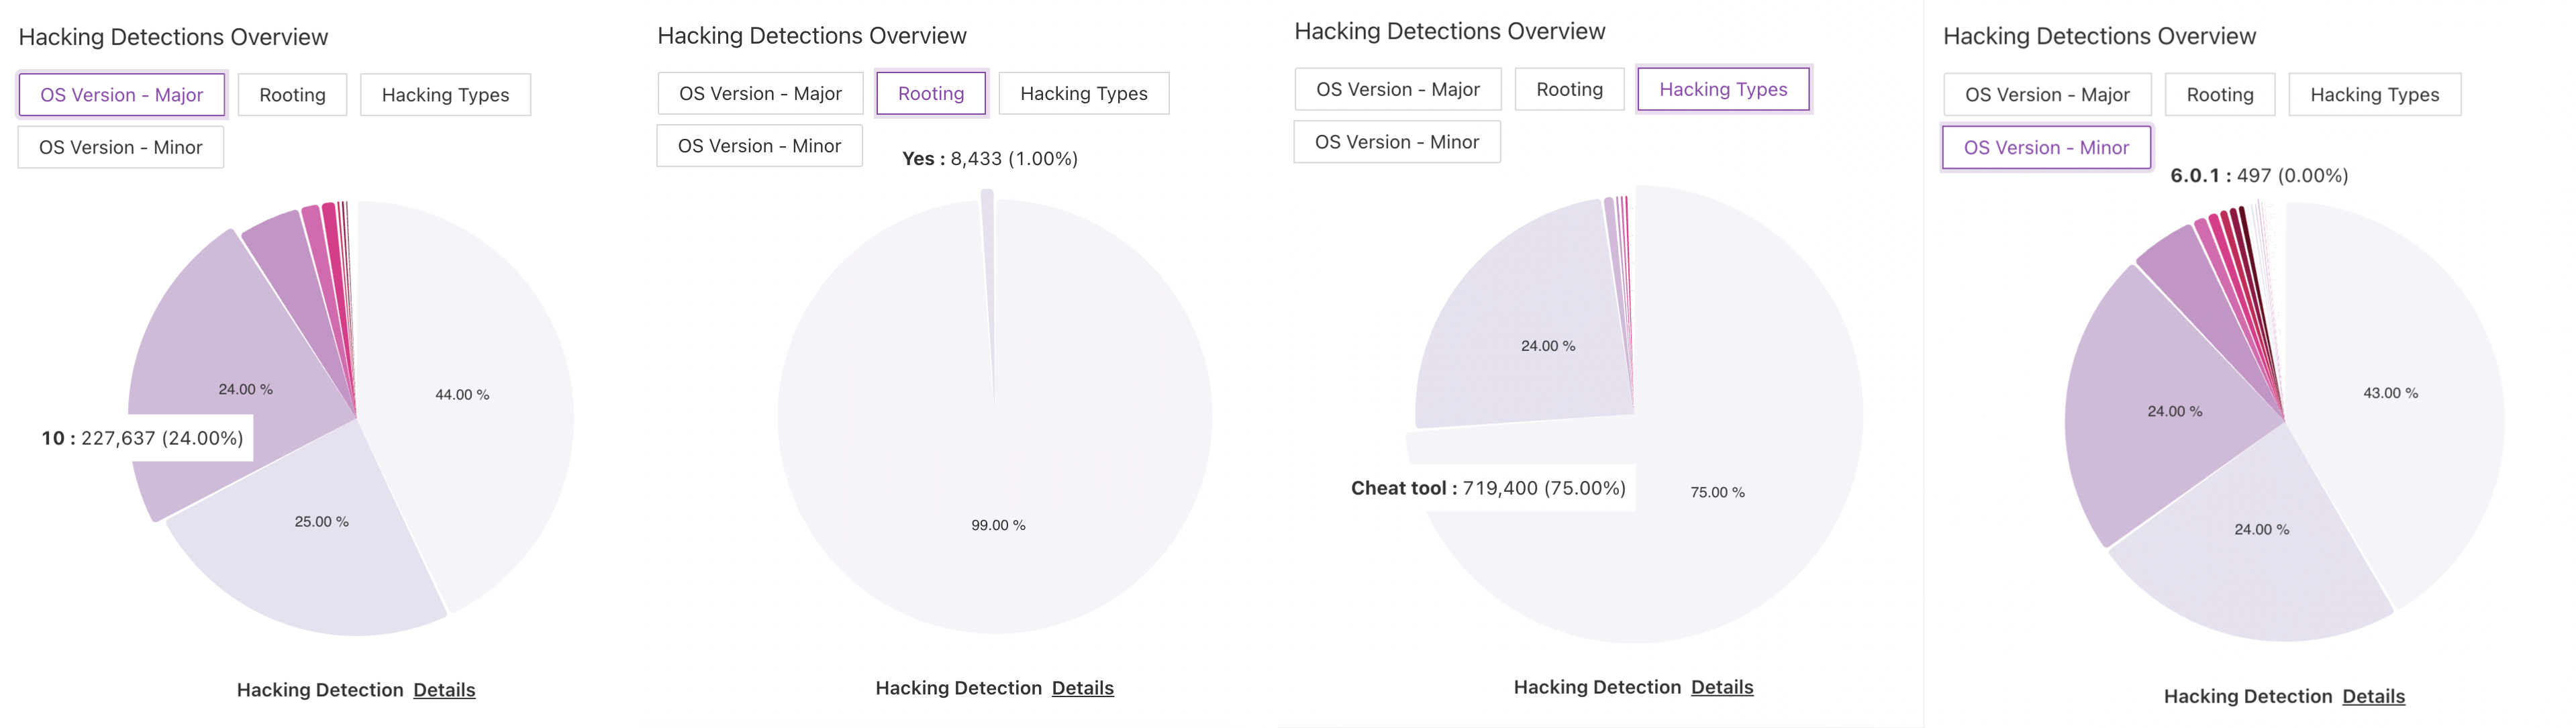 Hacking Detections Overview